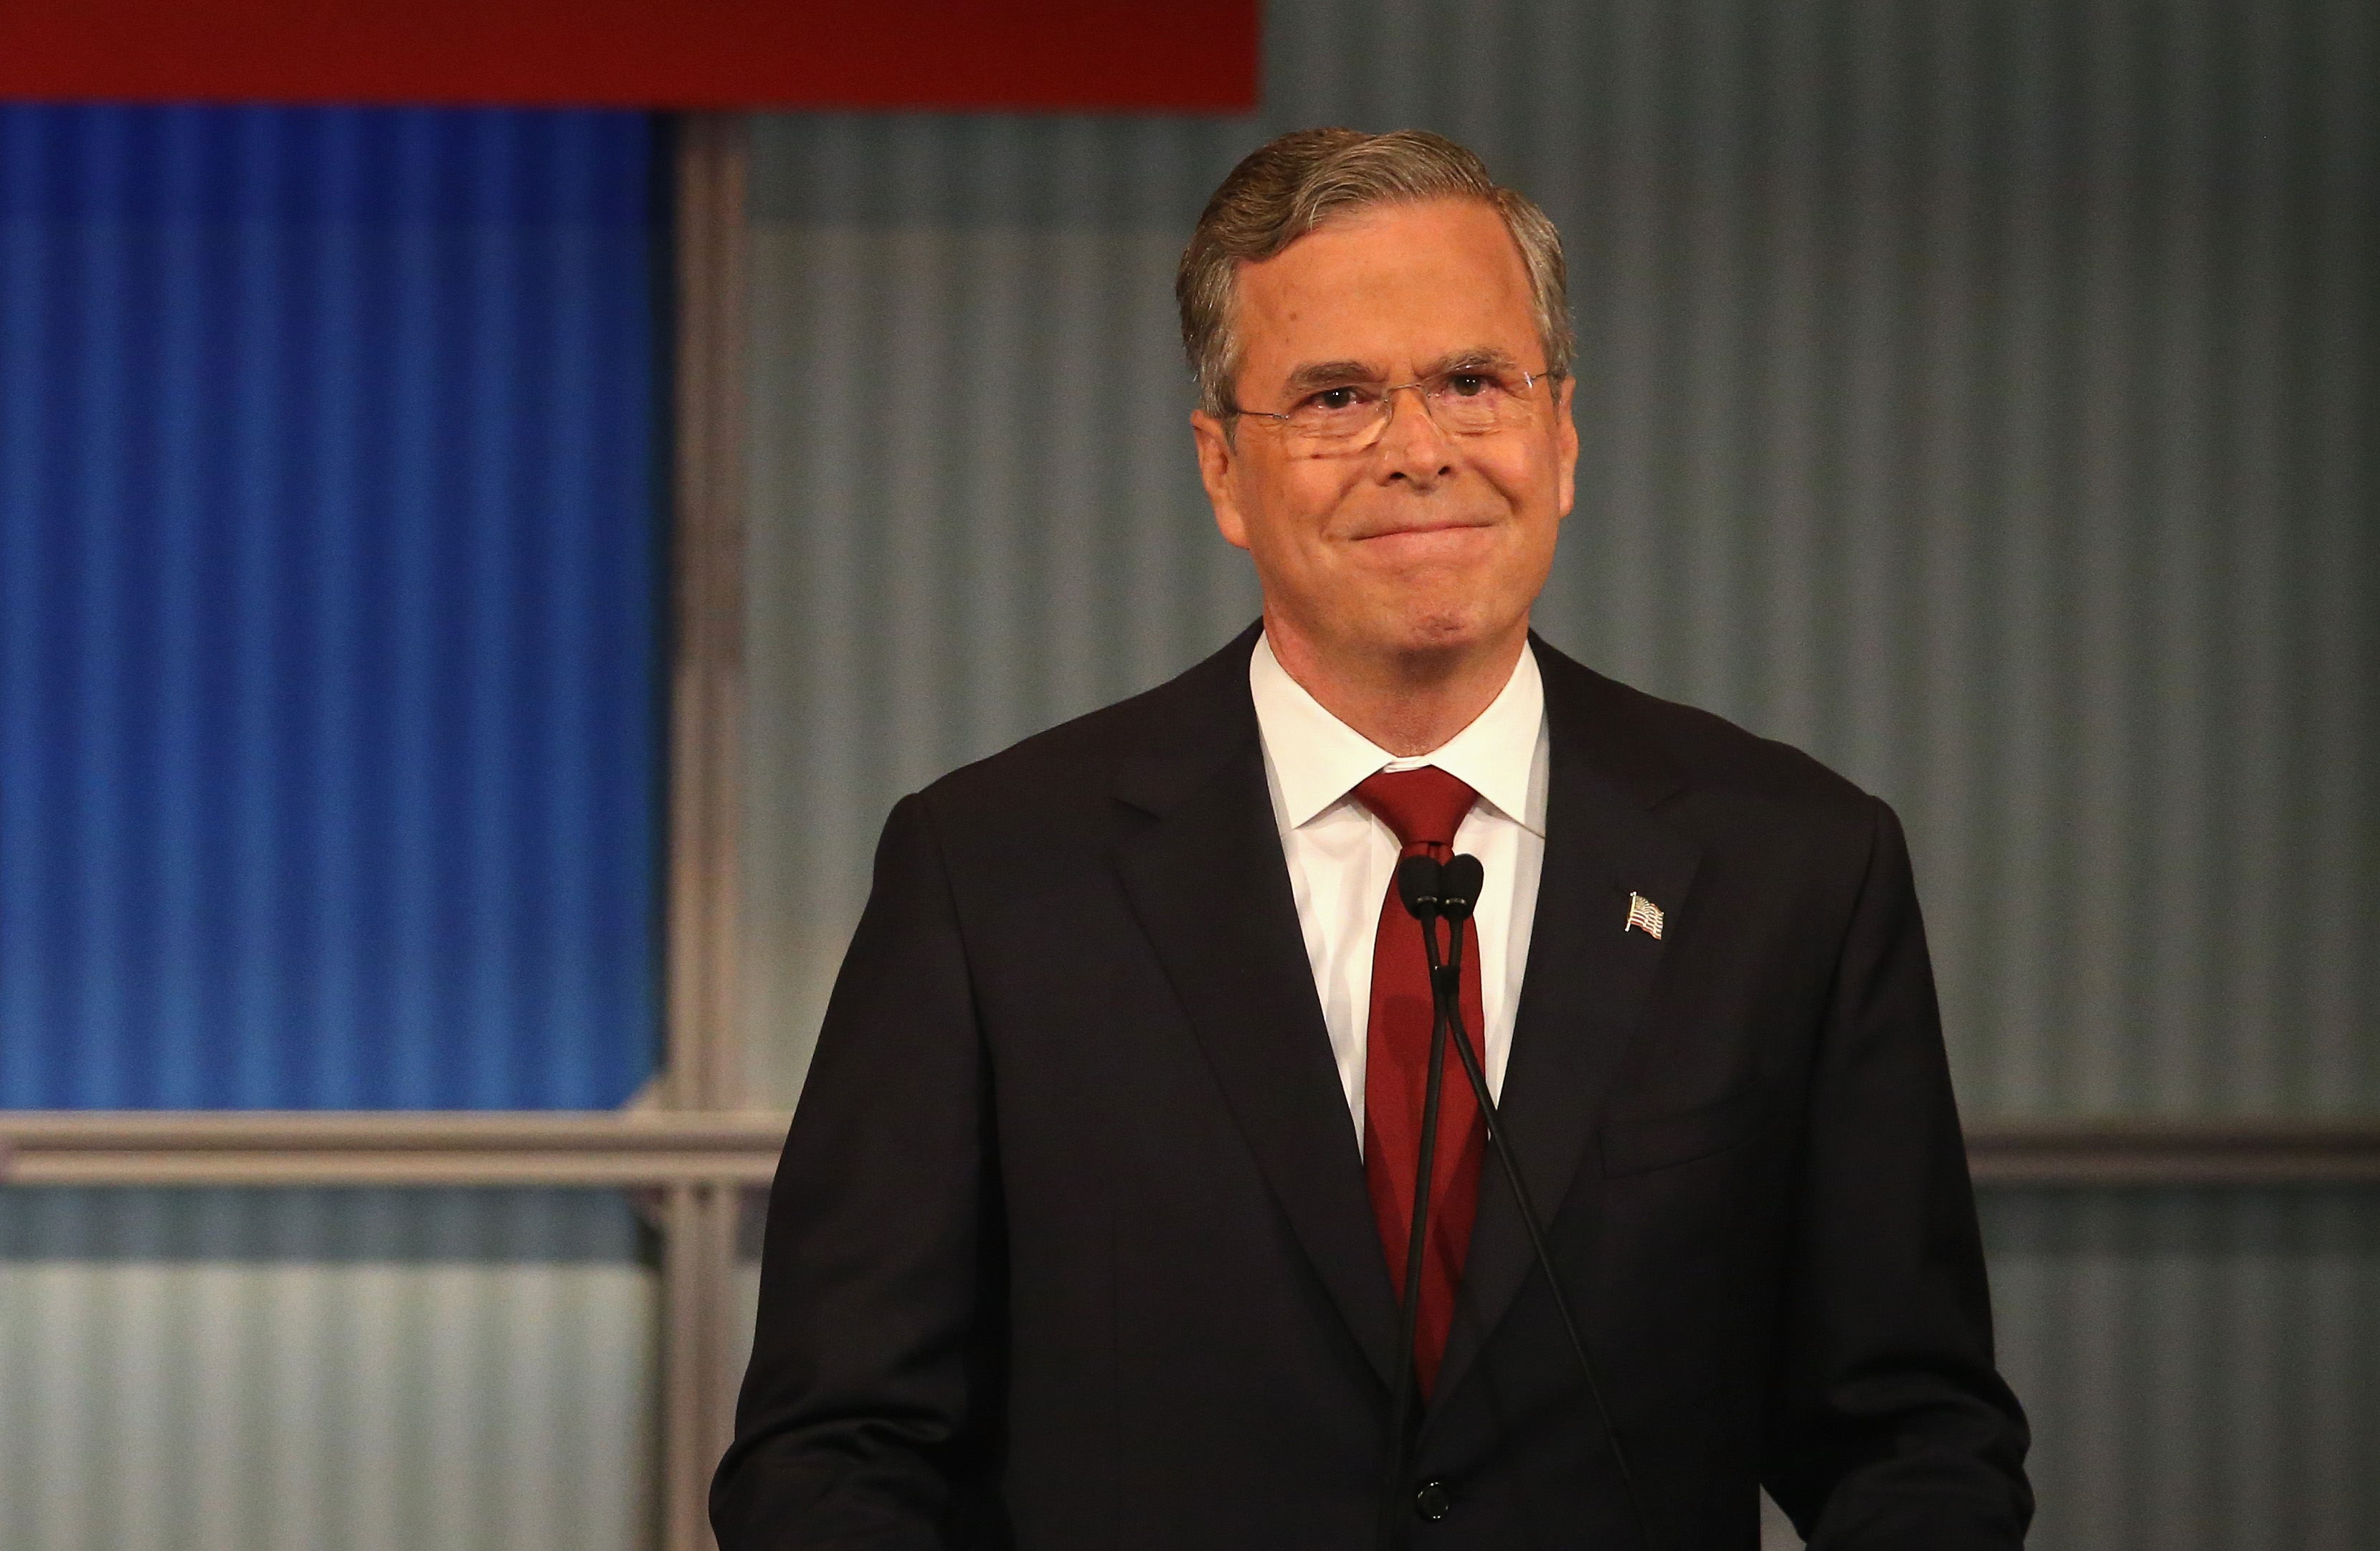 MILWAUKEE, WI - NOVEMBER 10: Republican presidential candidate Jeb Bush  smiles during the Republican